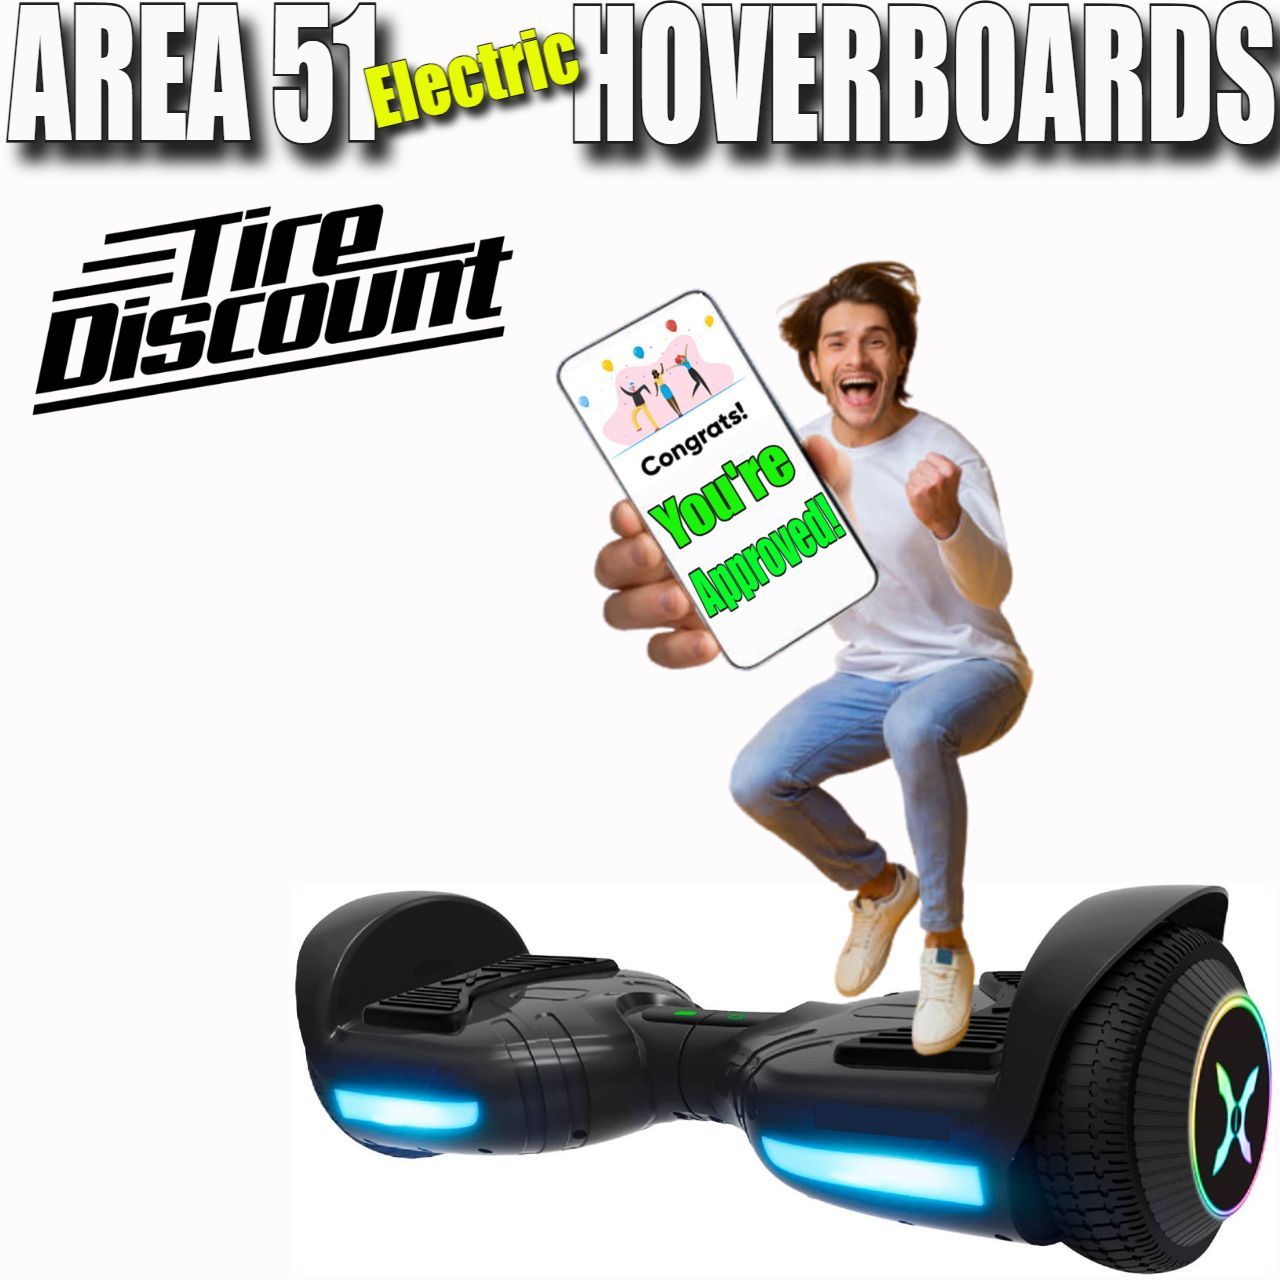 AREA 51 ELECTRIC HOVERBOARD BY TIRE DISCOUNT NO CREDIT NEEDED
